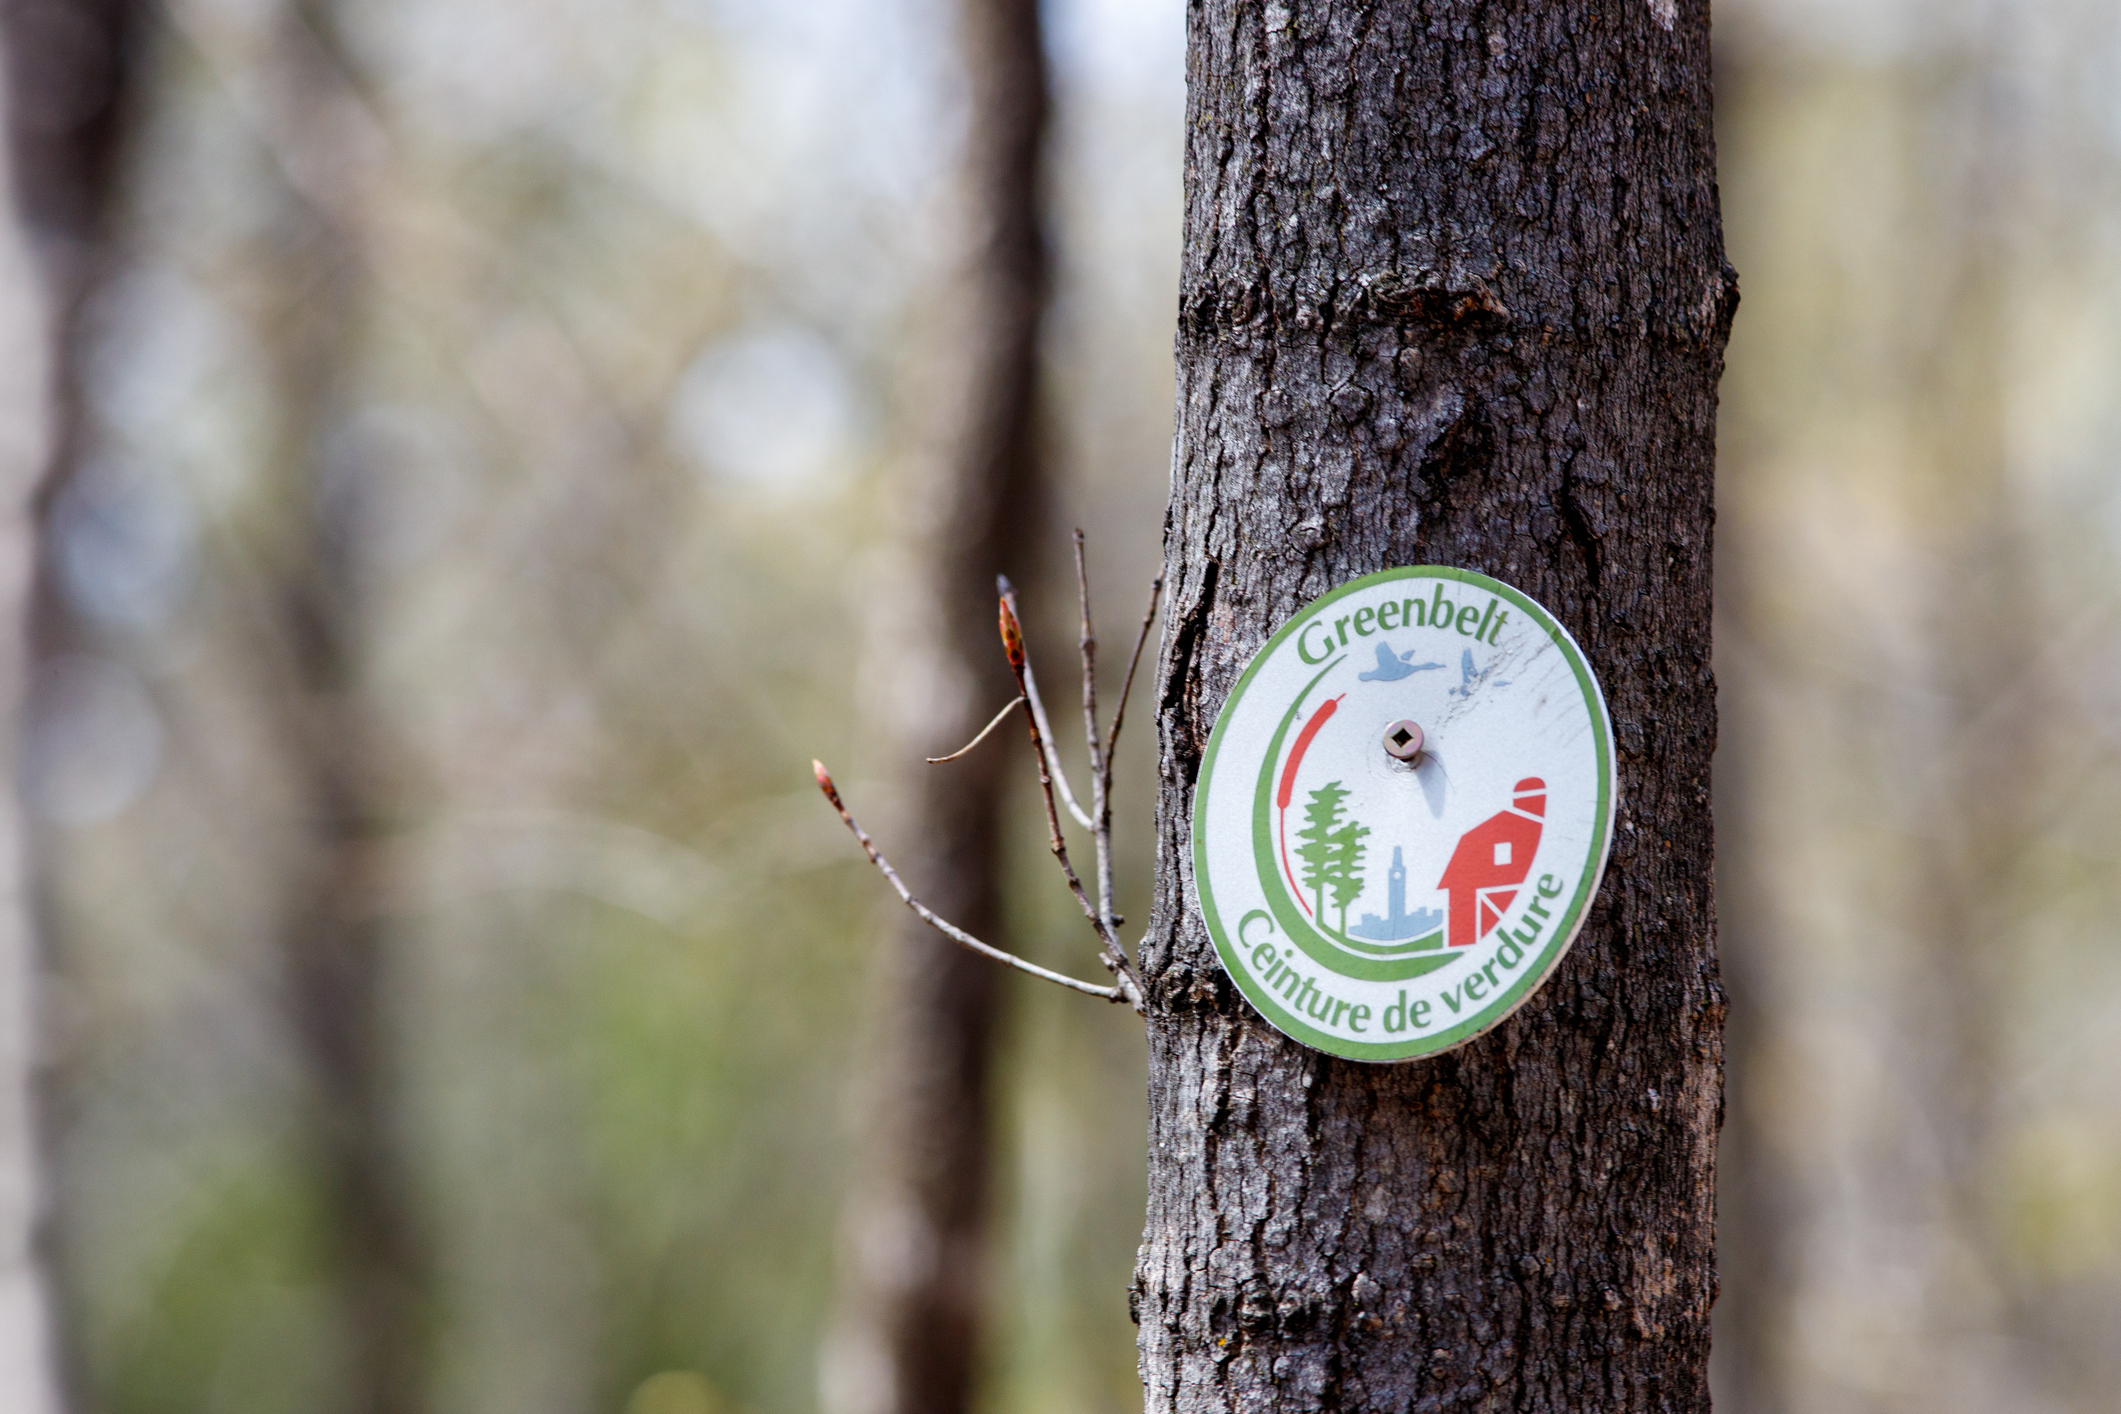 Image of a tree with a Greenbelt sign nailed to the side.